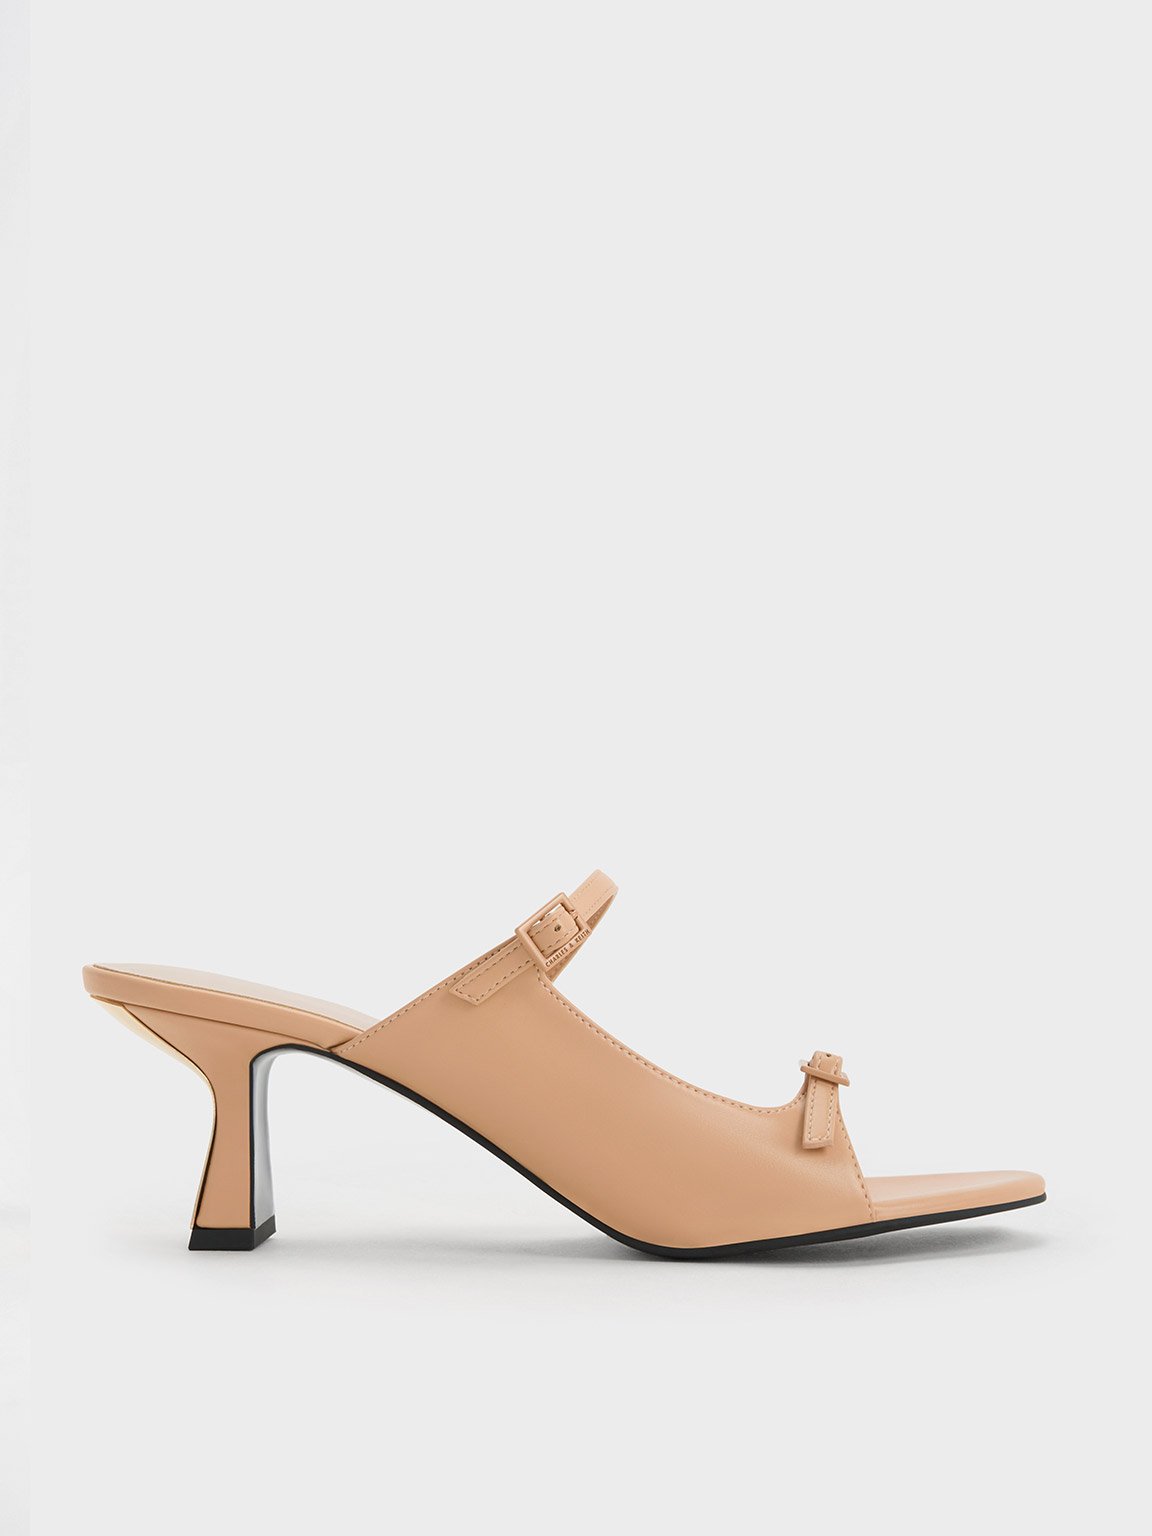 Charles Keith high heels | dubizzle